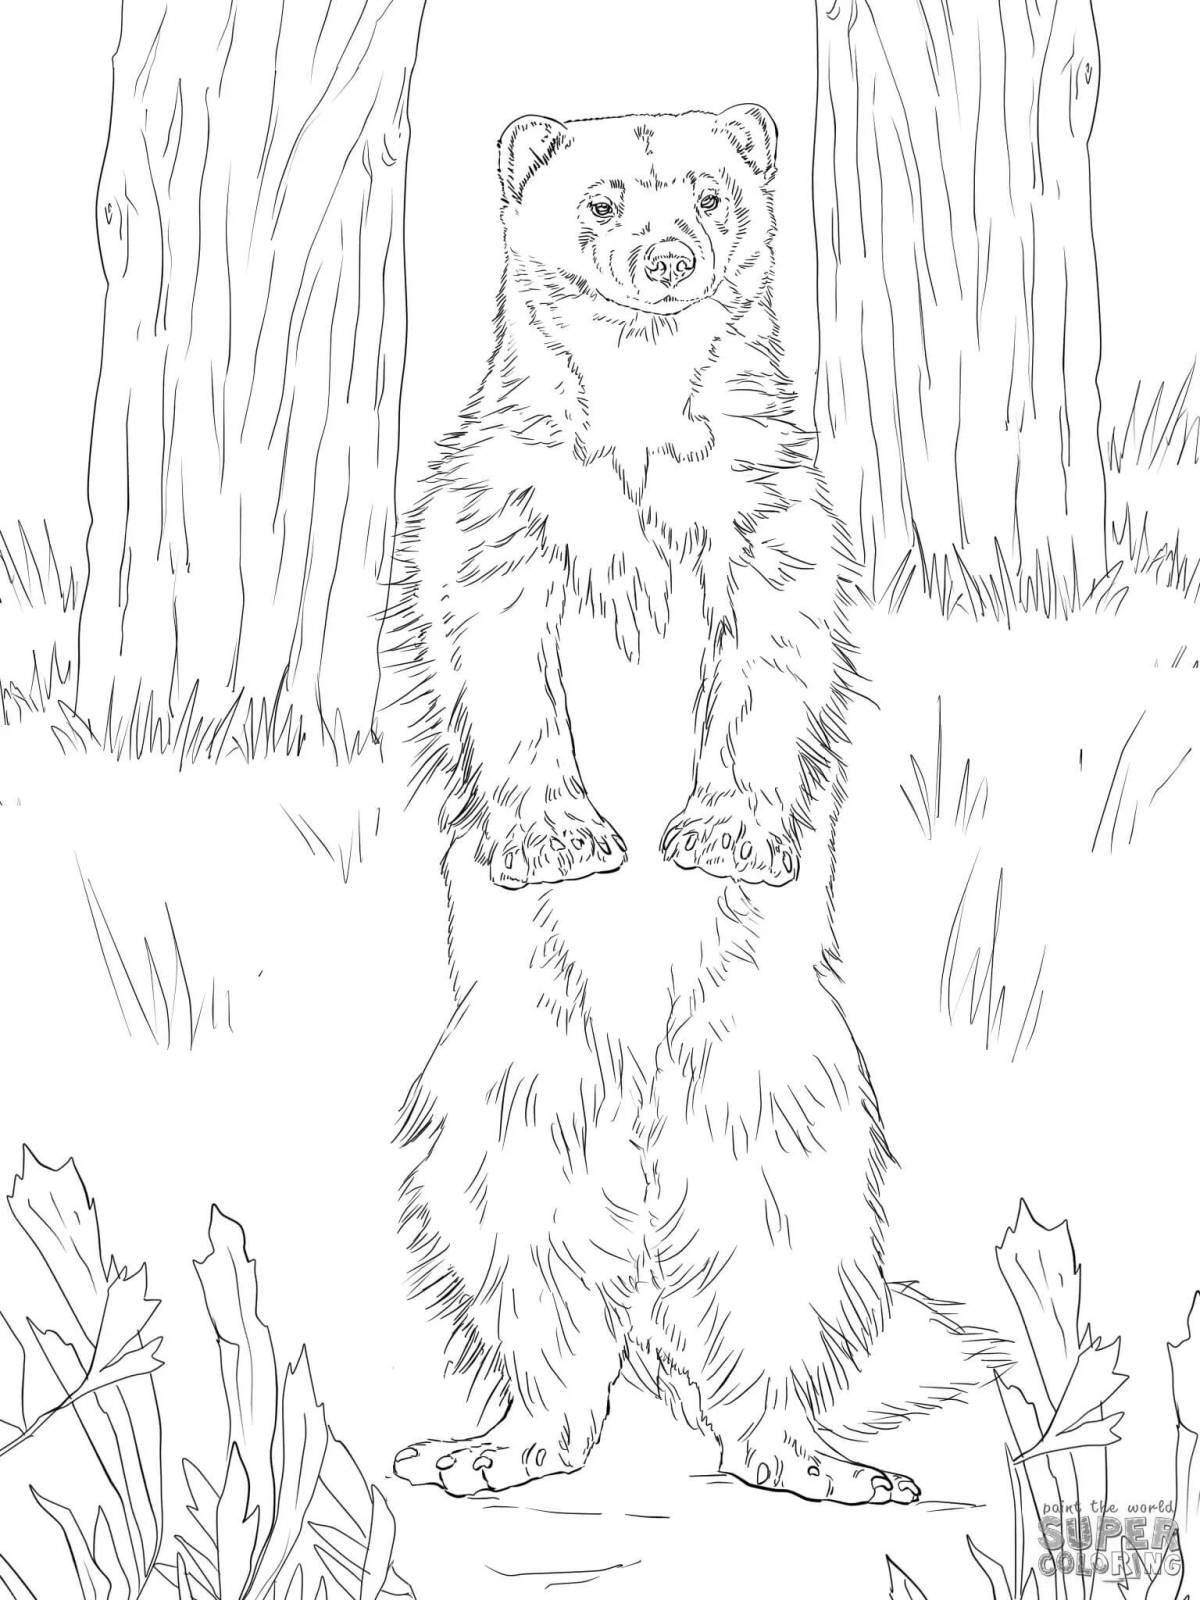 Amazing wolverine animal coloring page for kids